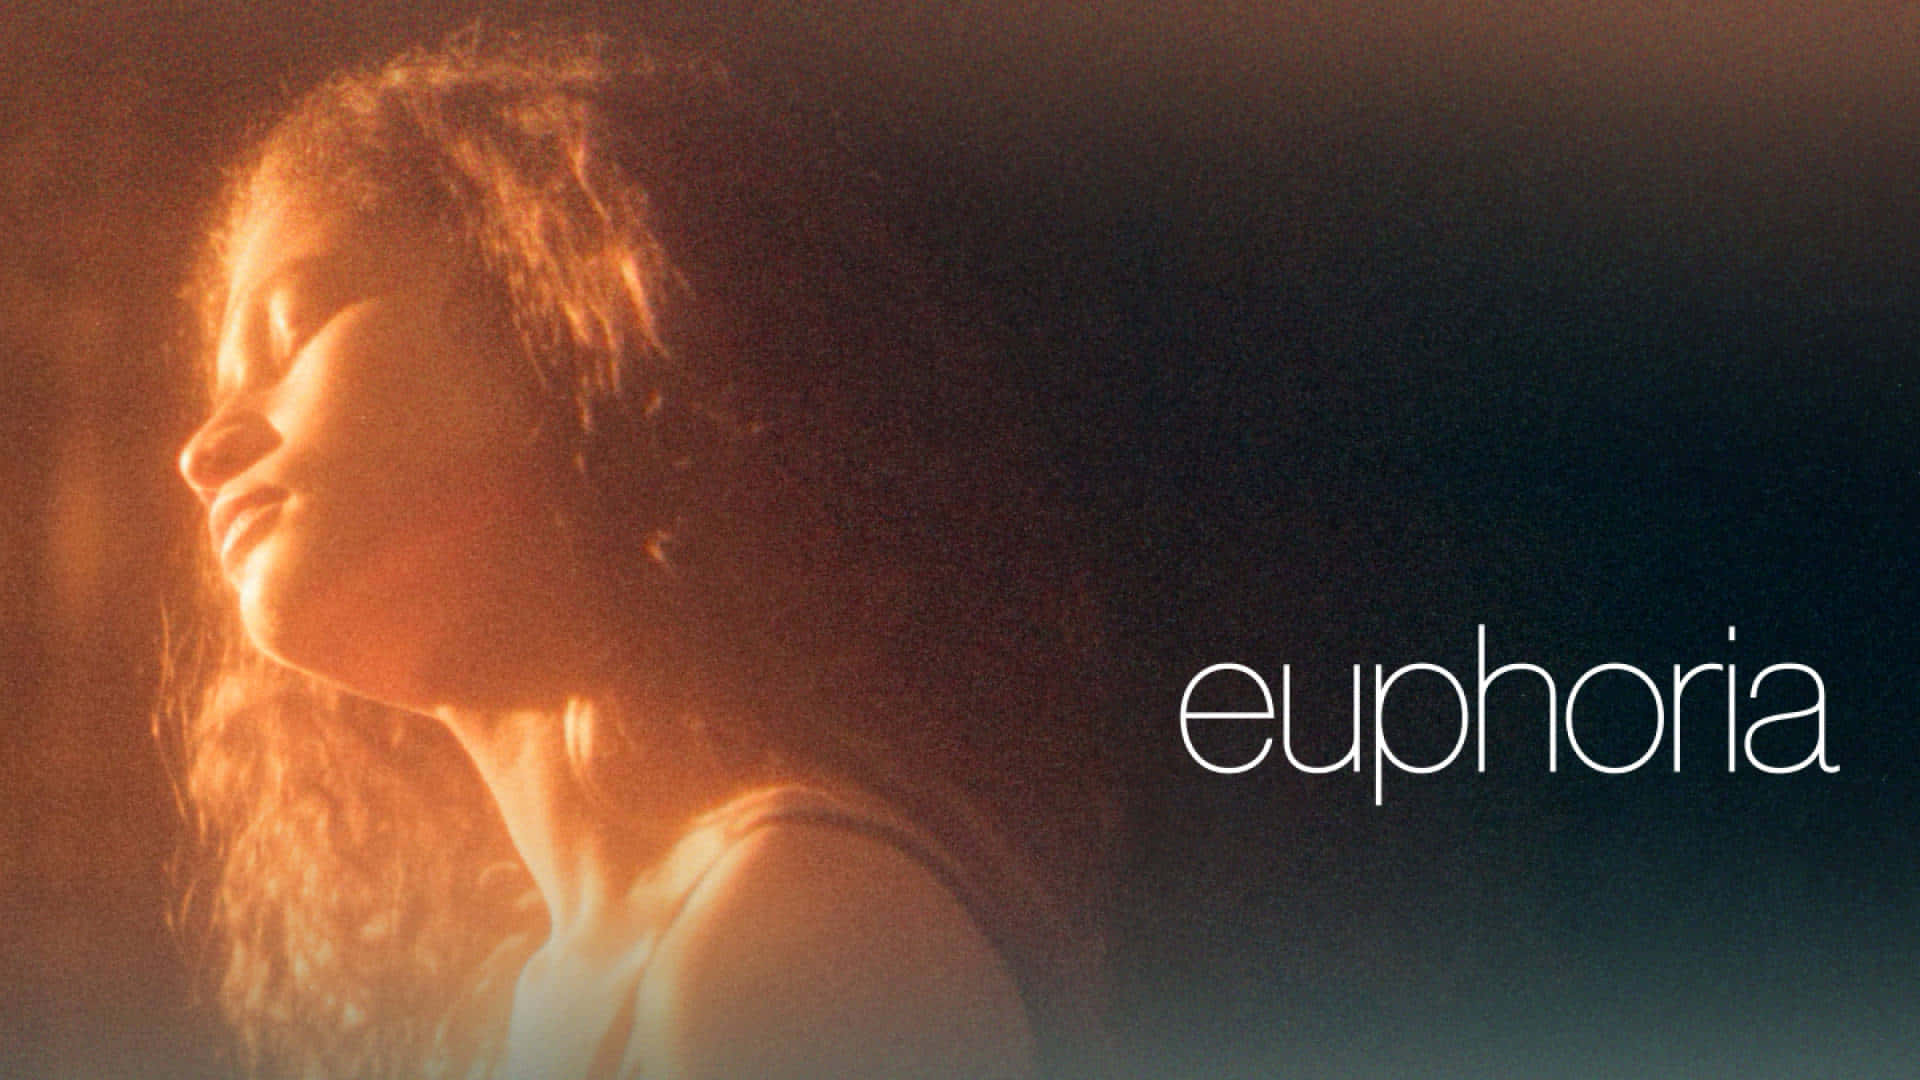 Euphoria - A Girl With Her Head Down Wallpaper